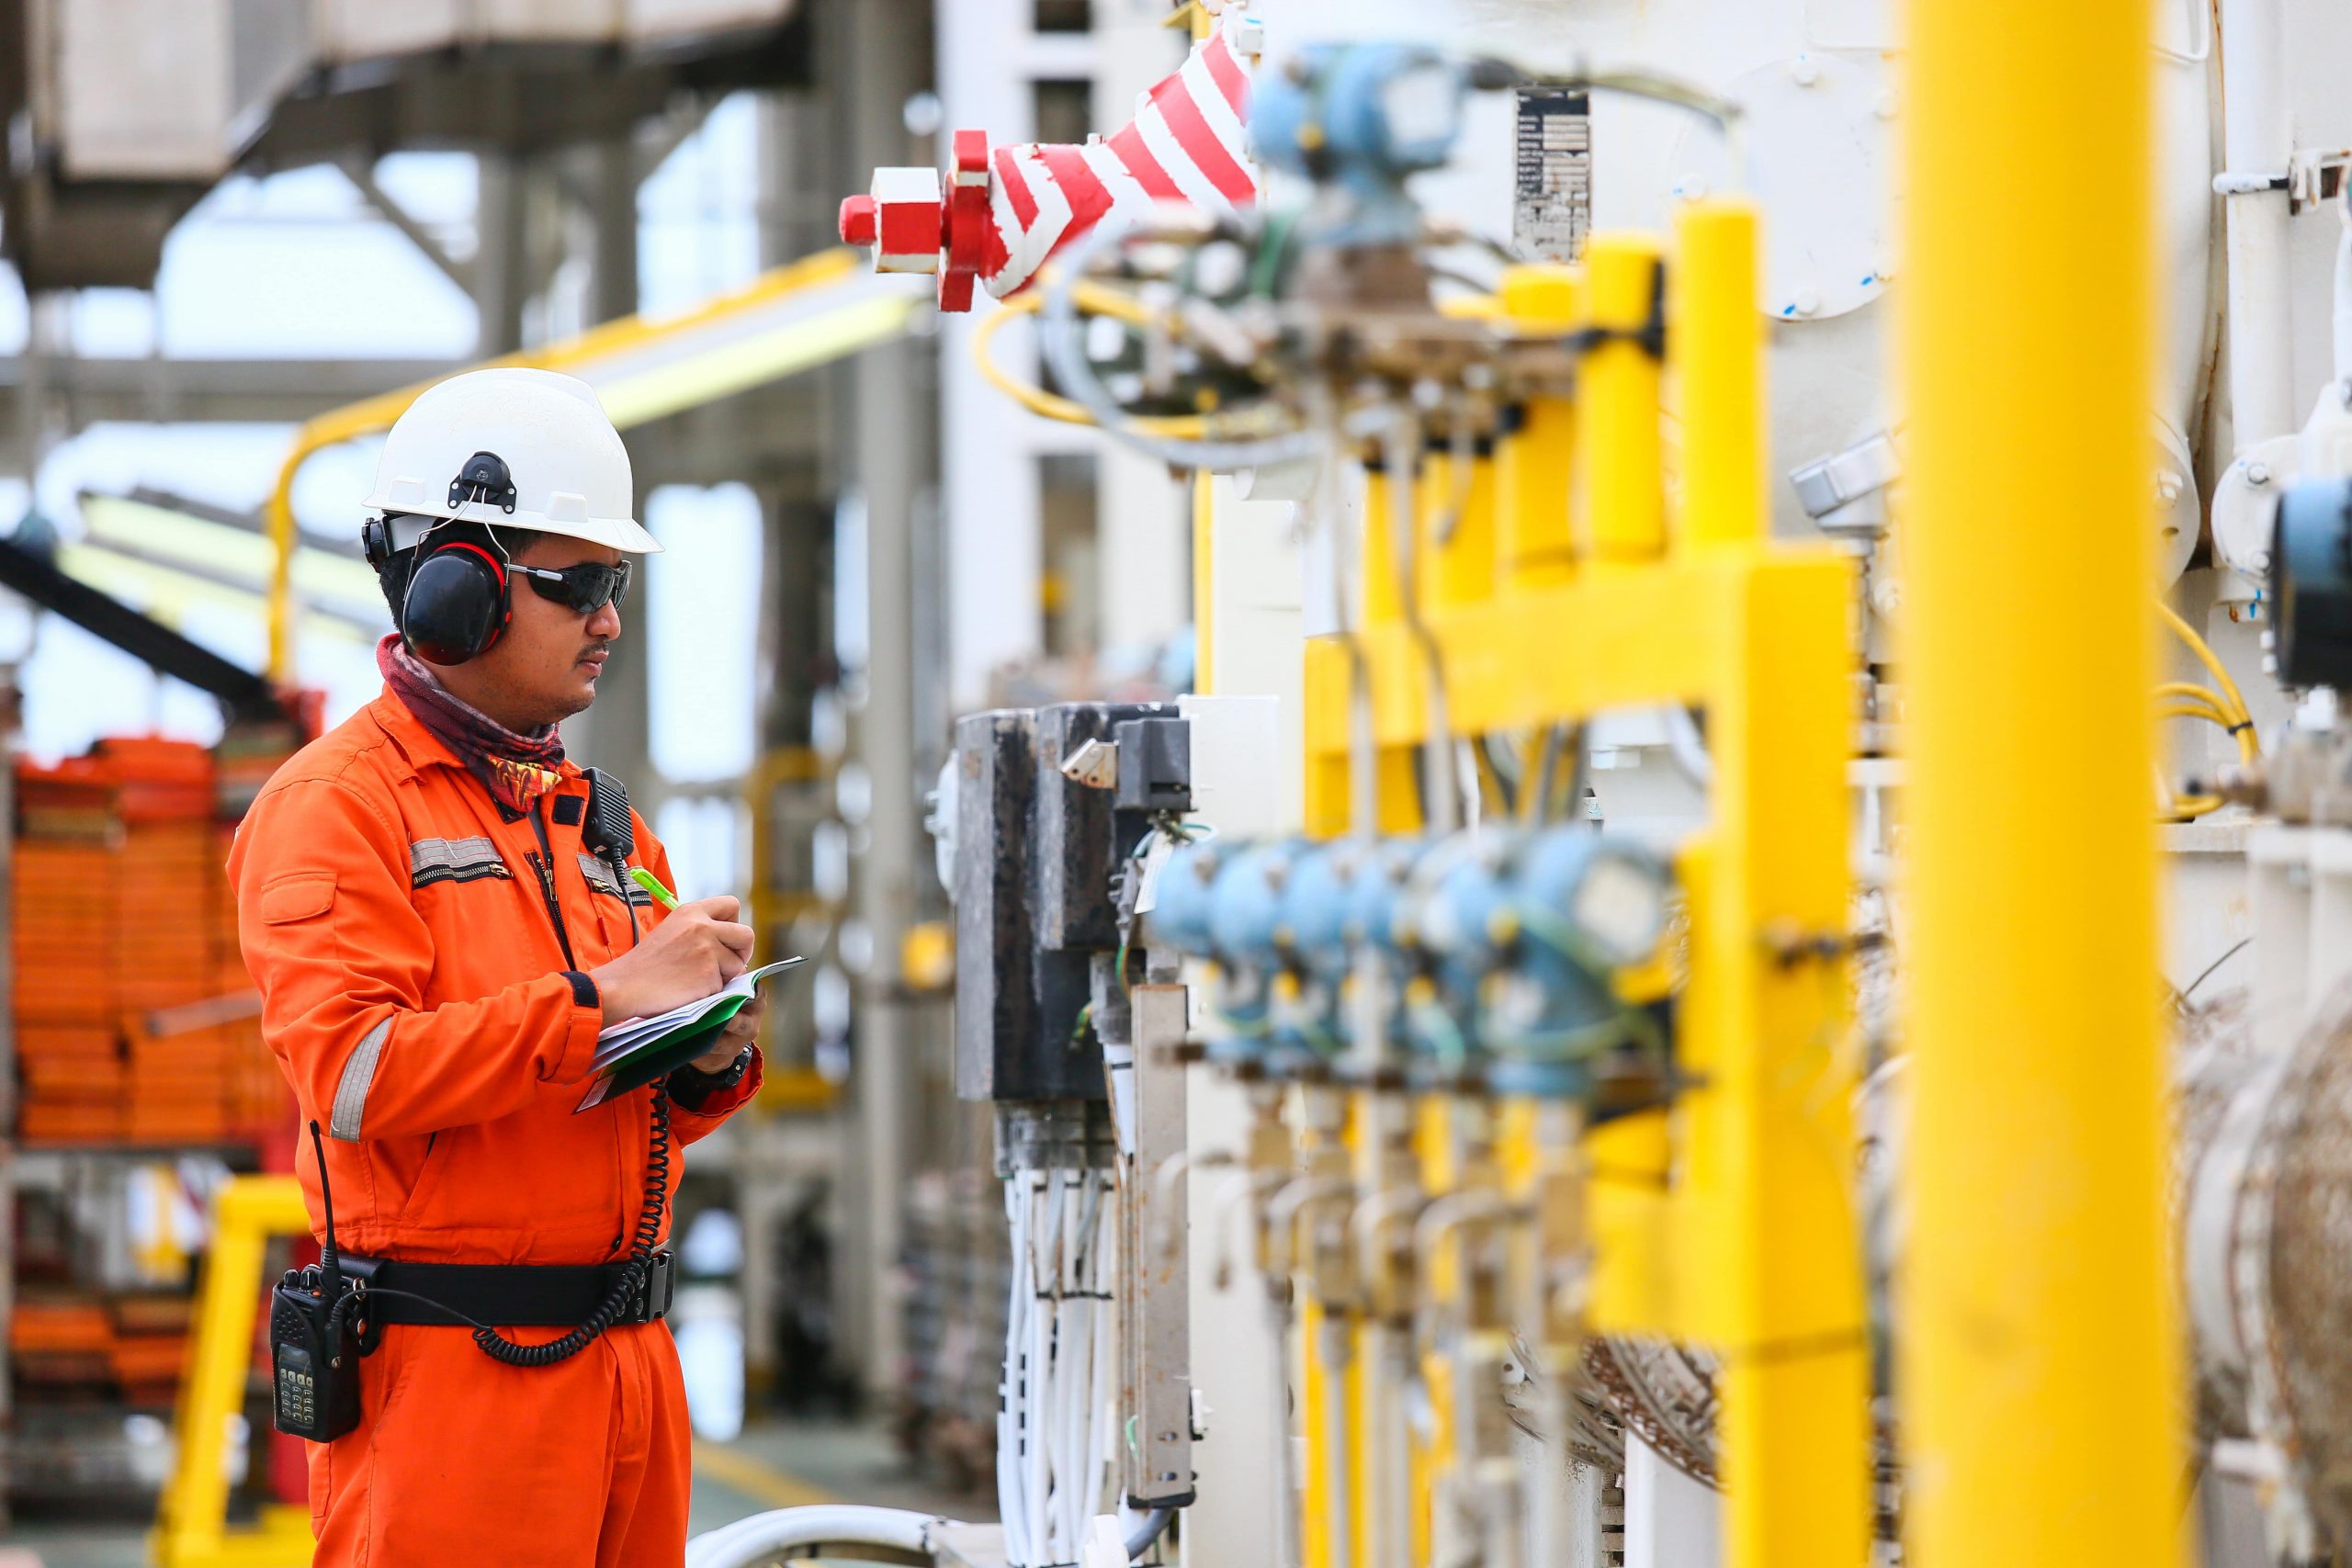 ShowEquip covers the Oil and Gas sector / industry. Image of worker making notes whilst looking at a panel.